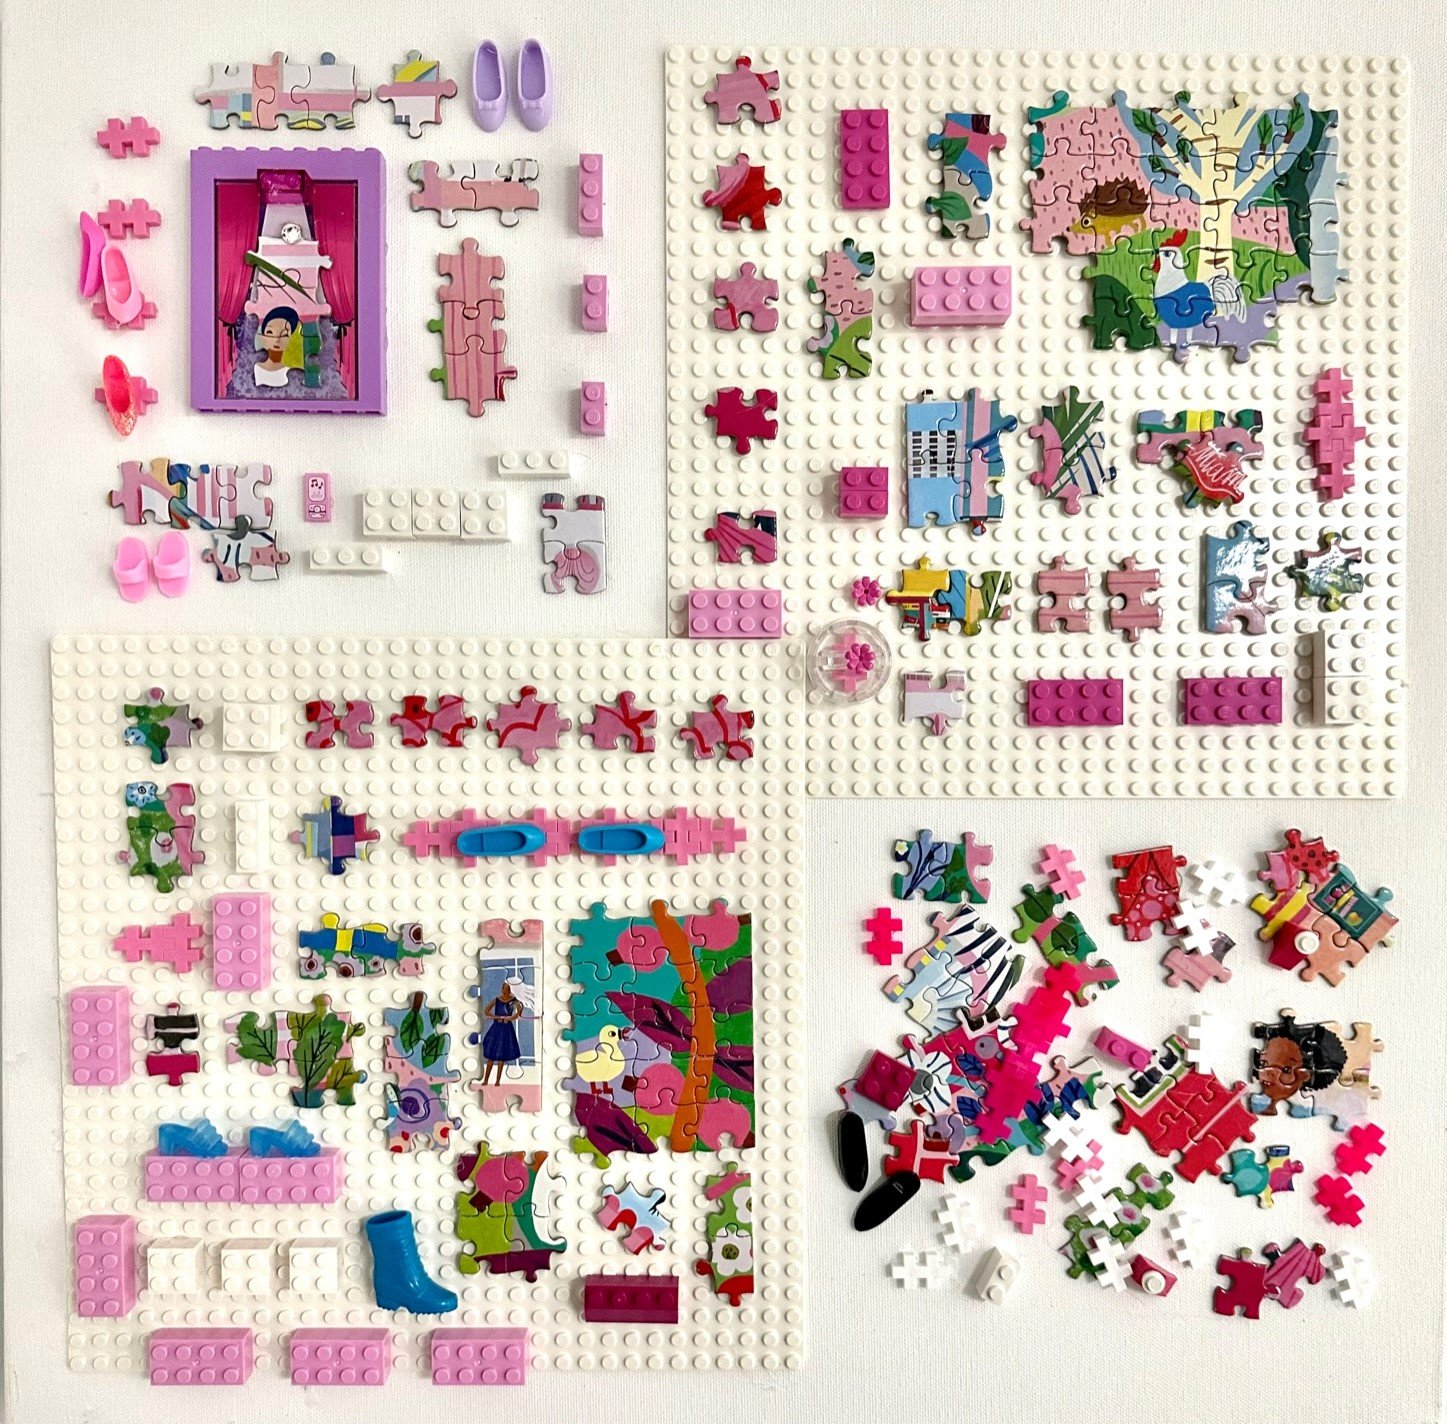 Puzzling Lego in Pink